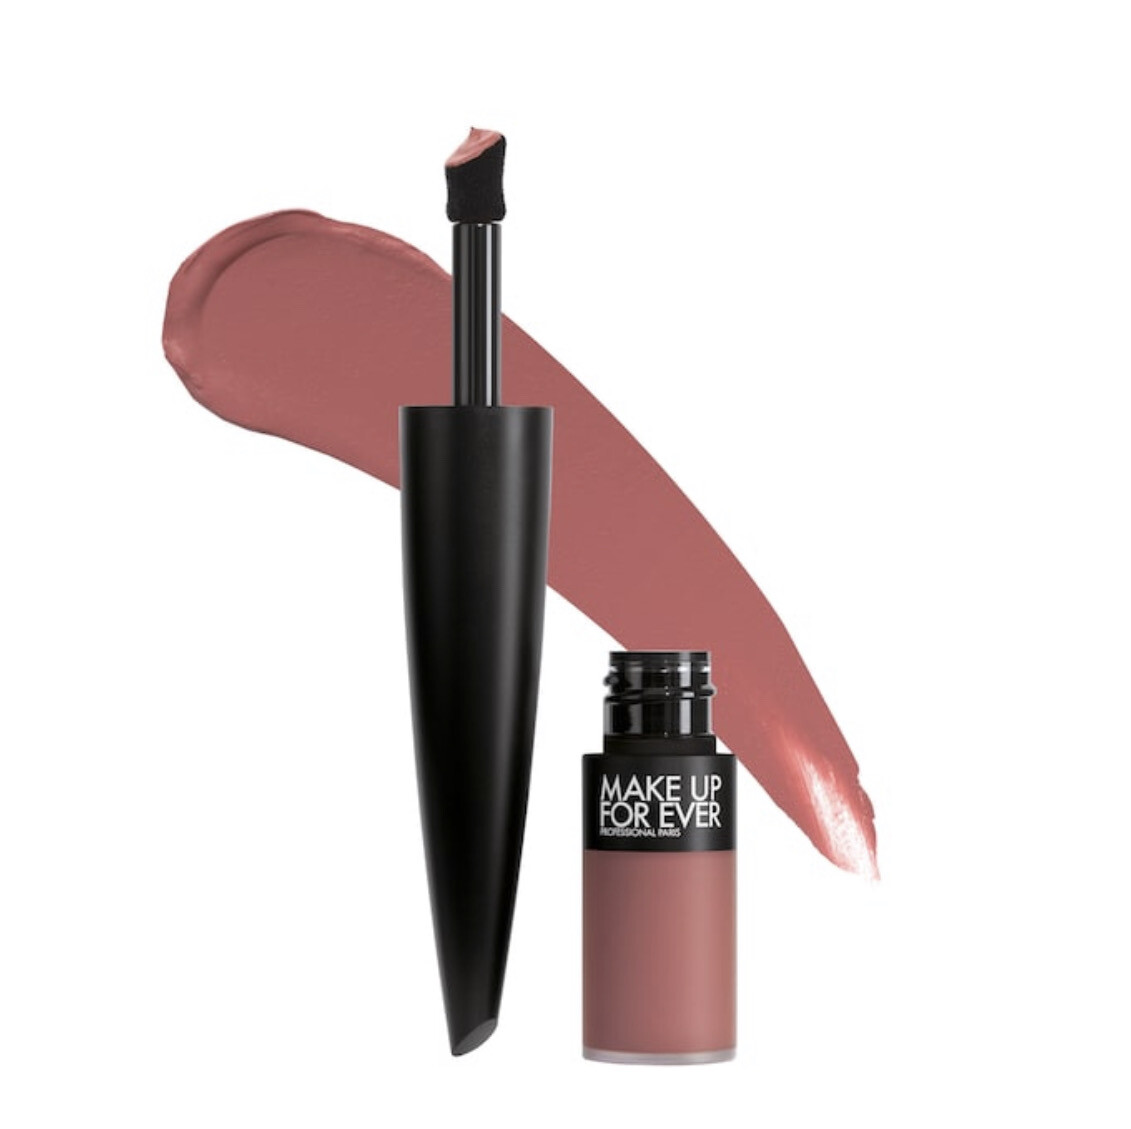 Make Up For Ever - Rouge Artist For Ever Matte 24HR Longwear Liquid Lipstick | 194 Immortal Rosewood - mauve nude